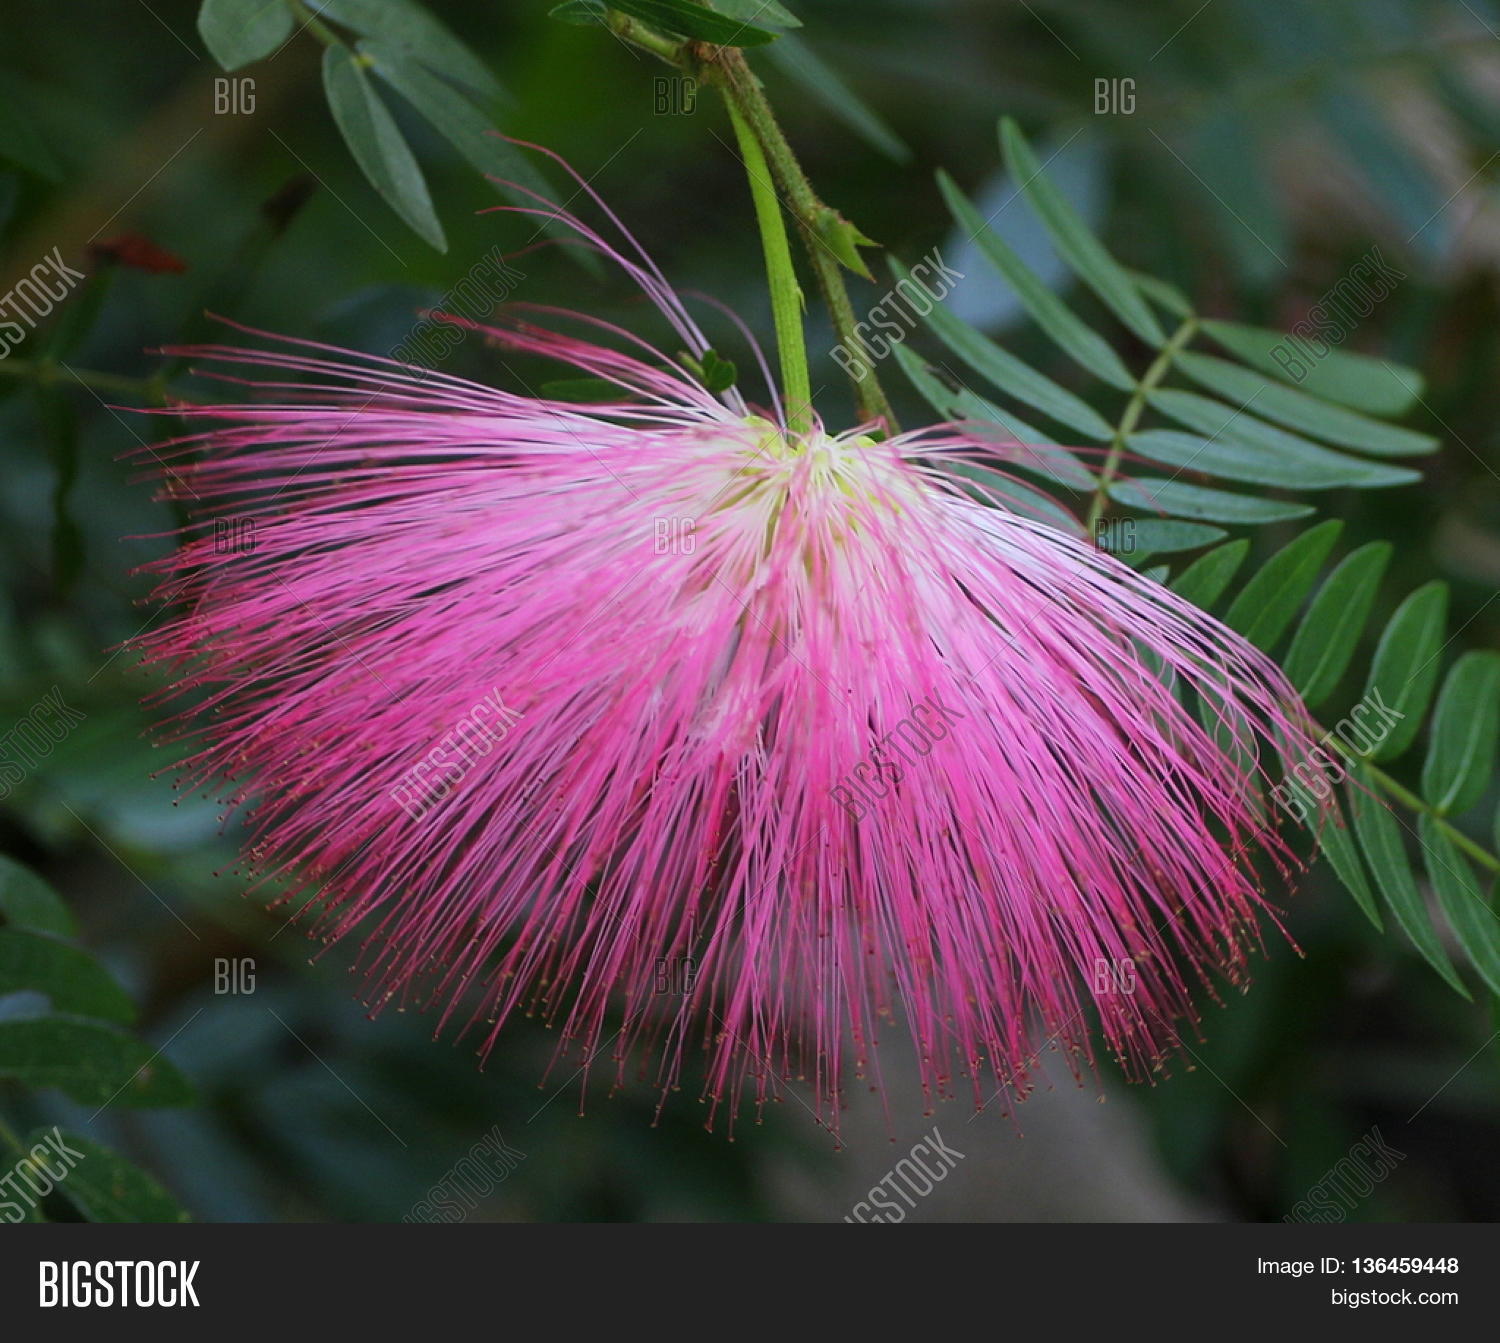 Tree With Pink Fluffy Flowers Choice Image - Flower Decoration Ideas